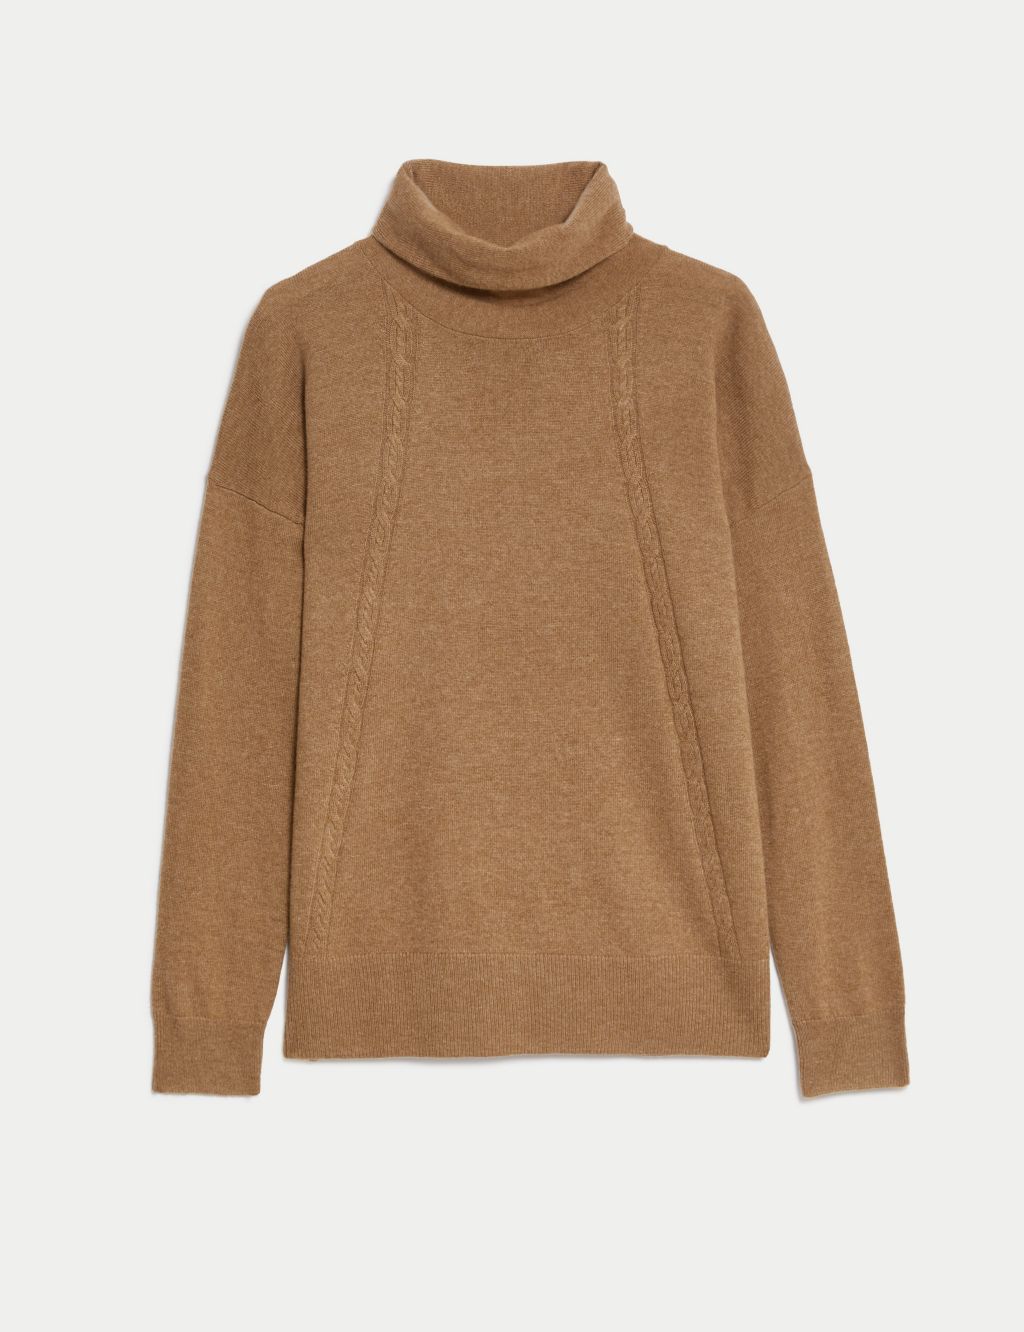 Wool Rich Cable Knit Jumper with Cashmere image 2